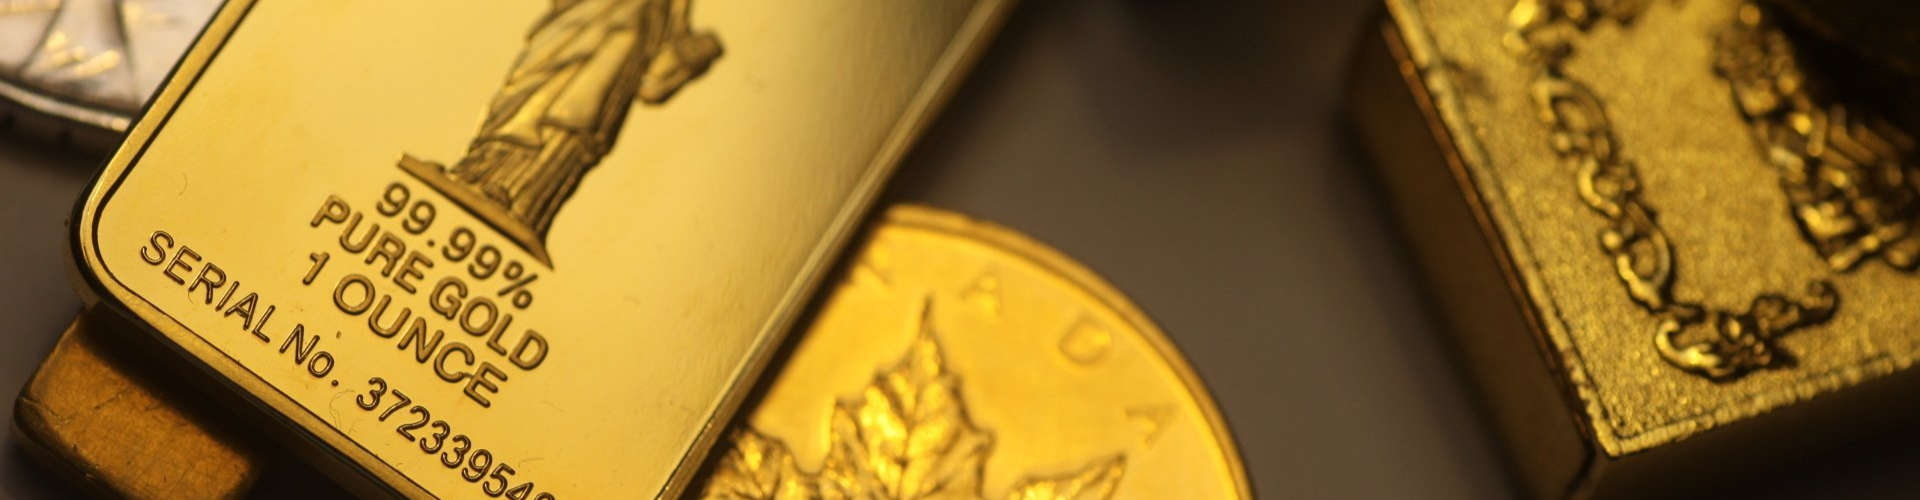 miscellaneous gold bullion bars and coins on a surface